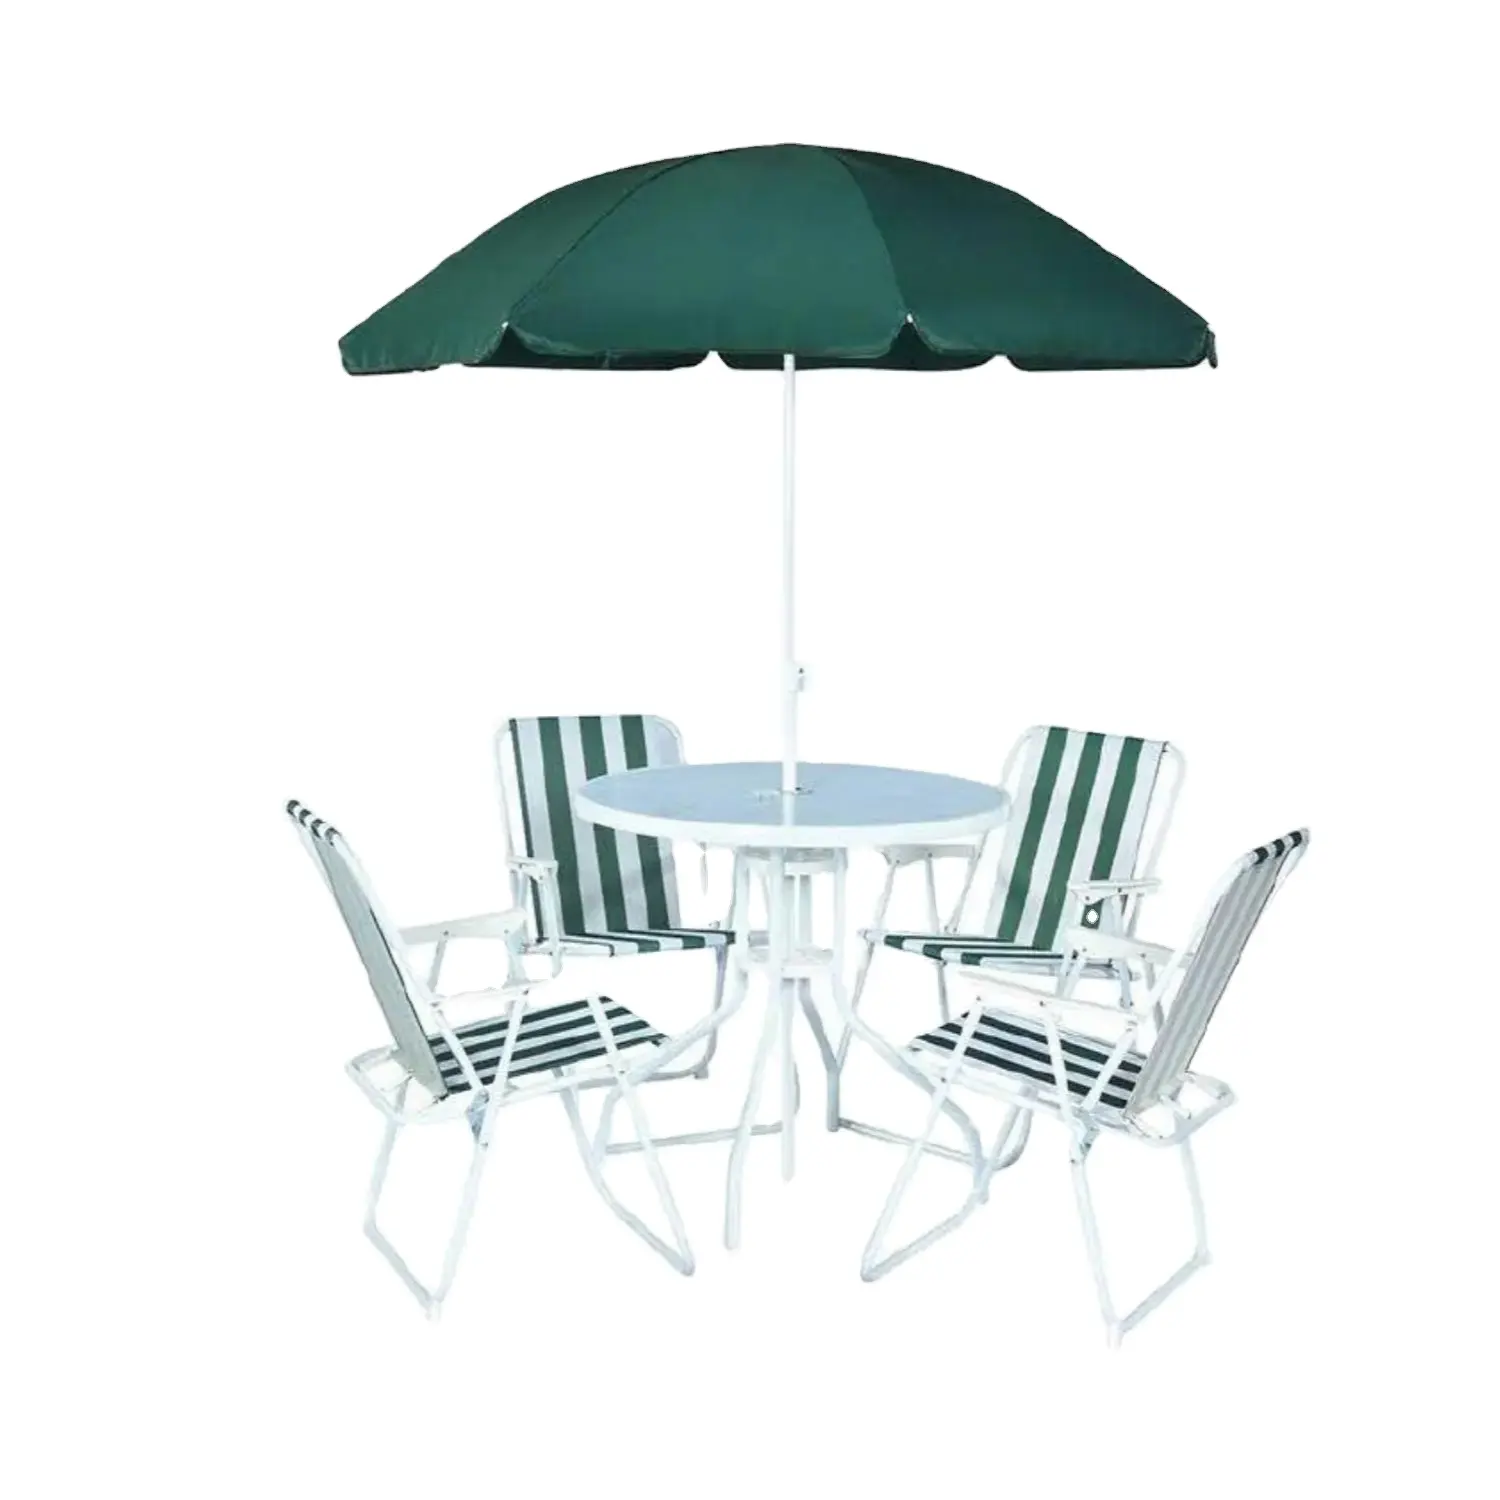 table and chairs by ousen yingji PATIO CHAIRS UMBRELLA TABLE outdoor equipment